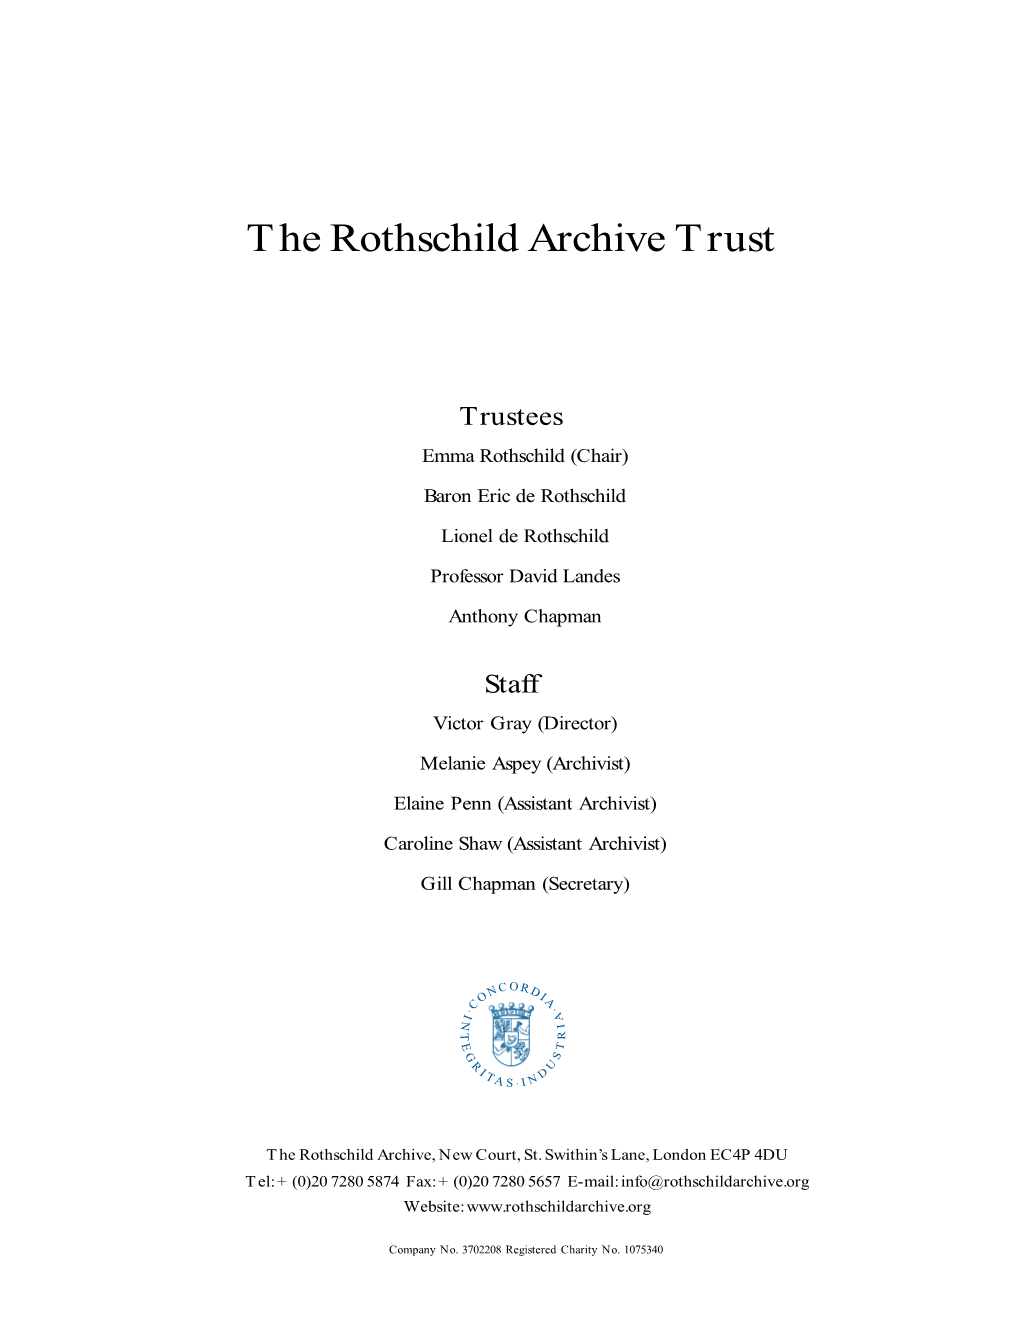 The Rothschild Archive Trust